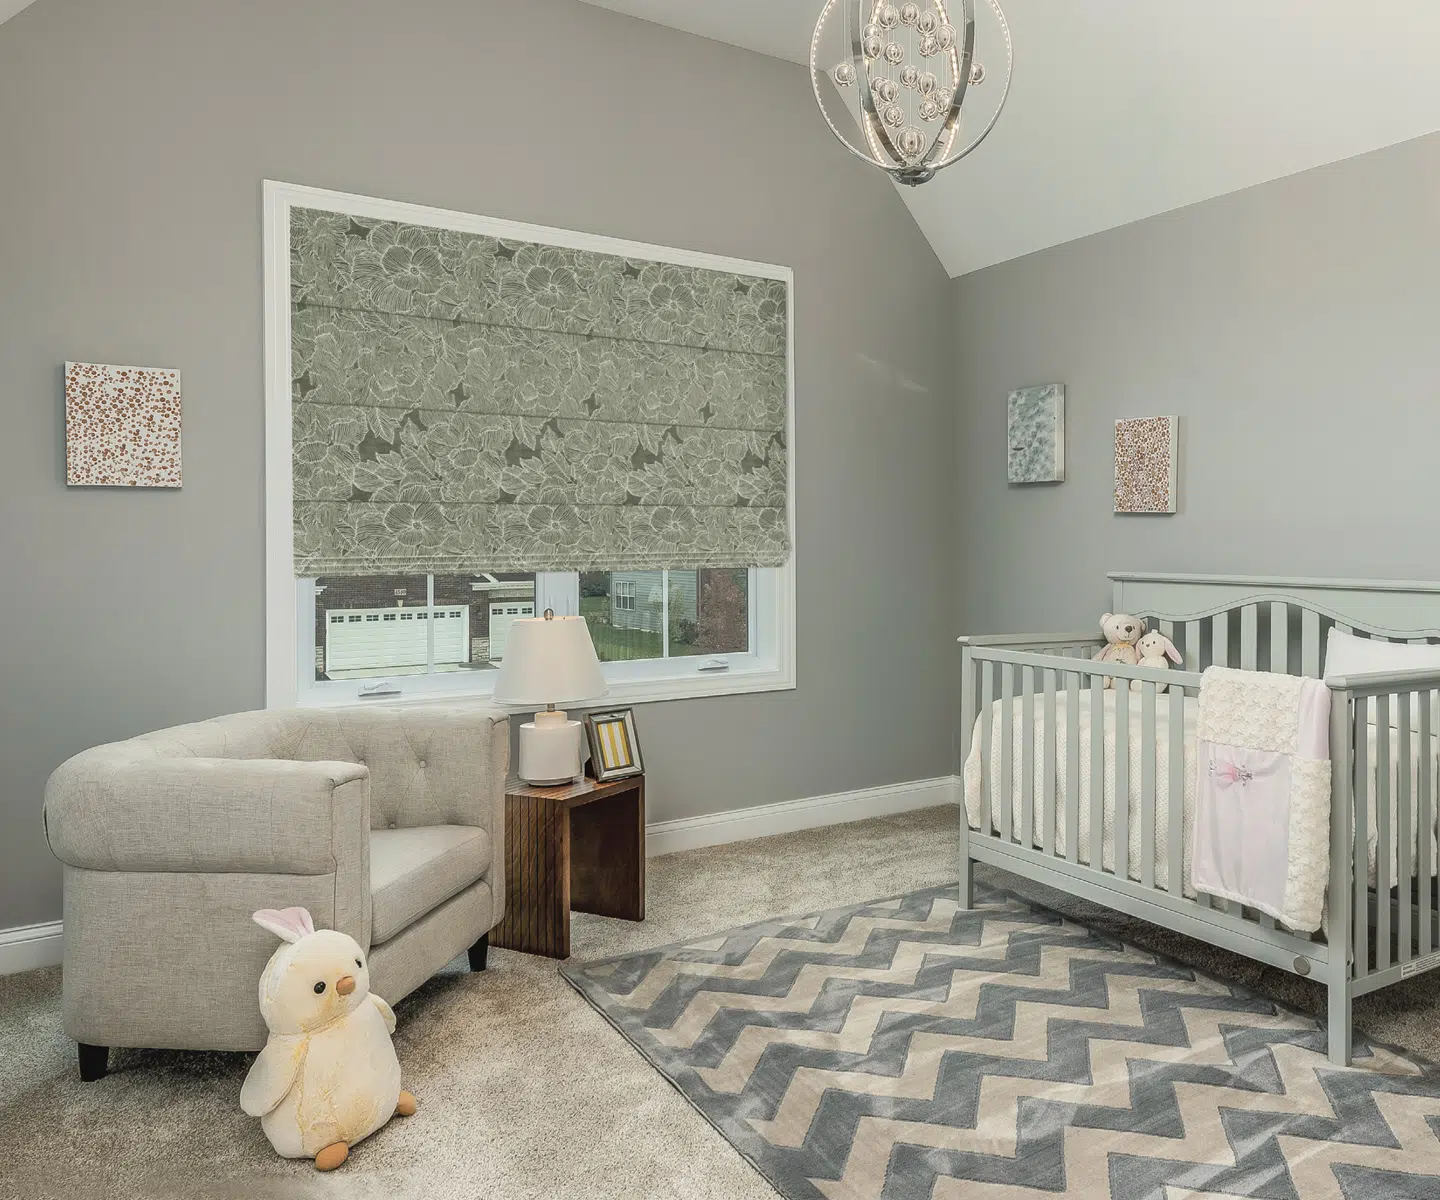 A elegant nursery in Aldie, Va with Aerolite Cordless Lifting System to ensure safety of children